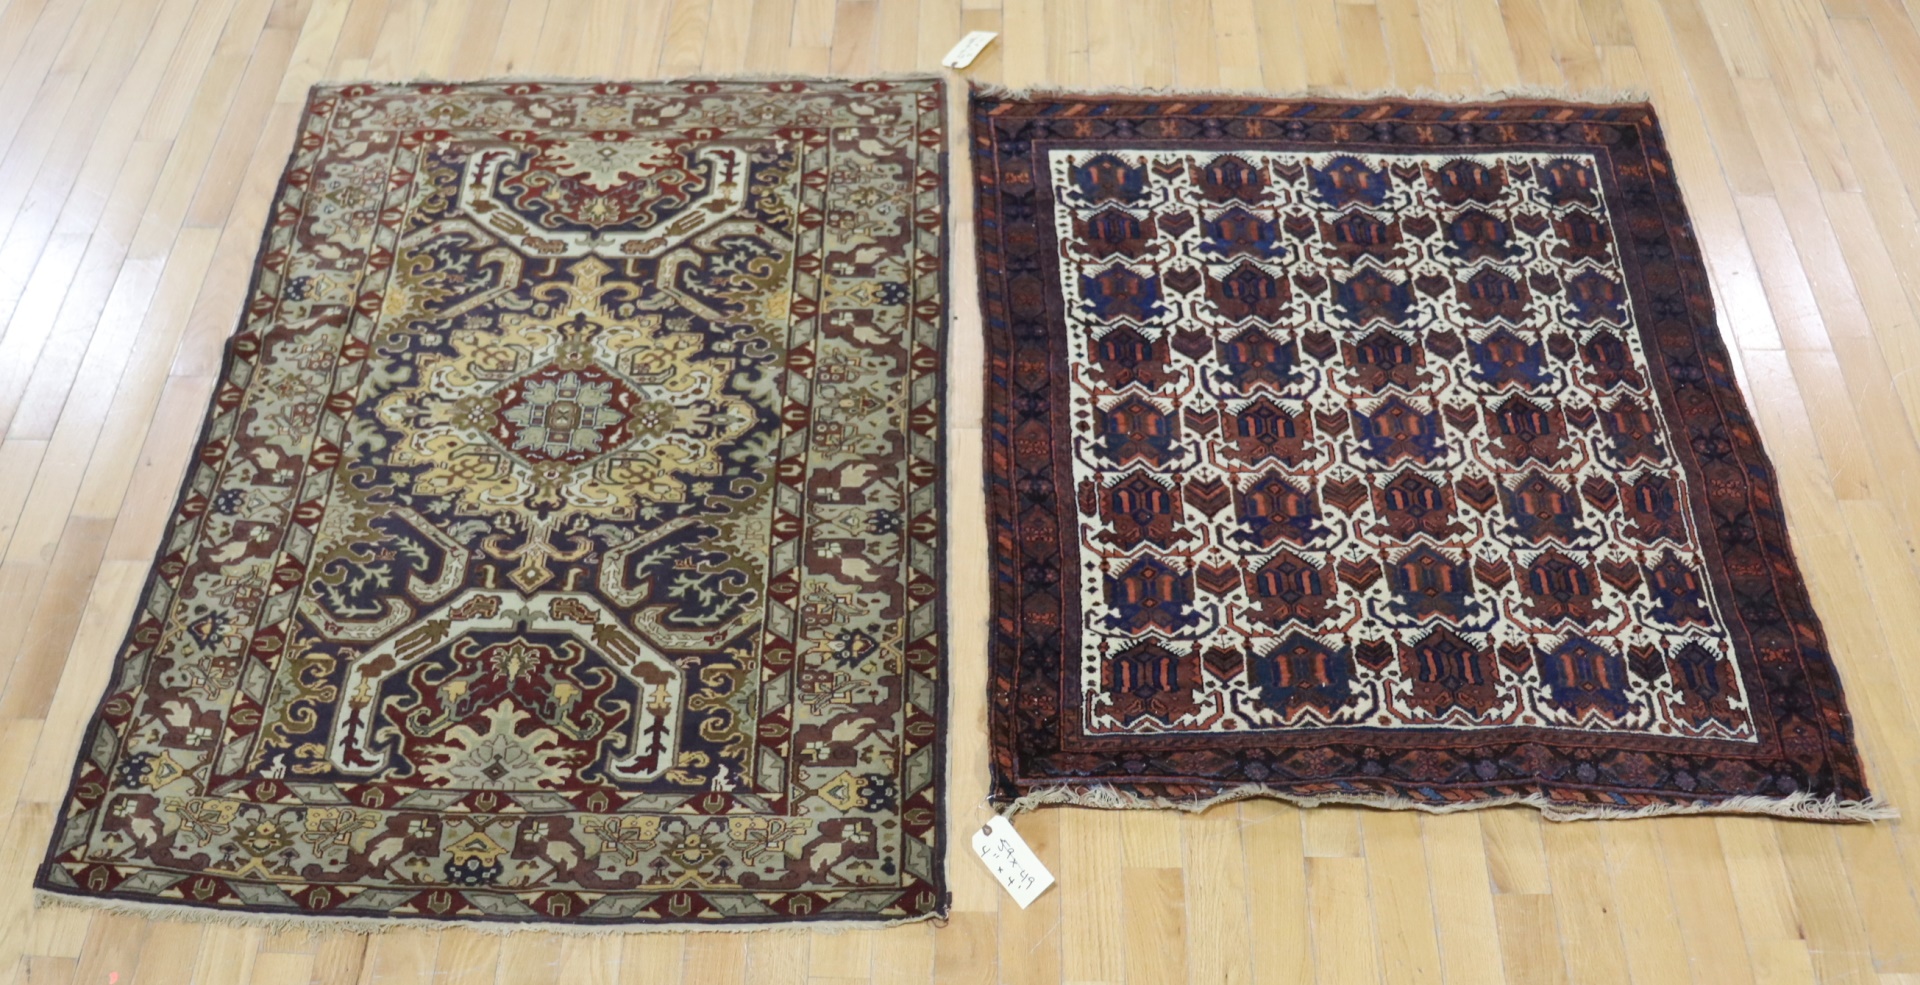 2 ANTIQUE & FINELY HAND WOVEN AREA